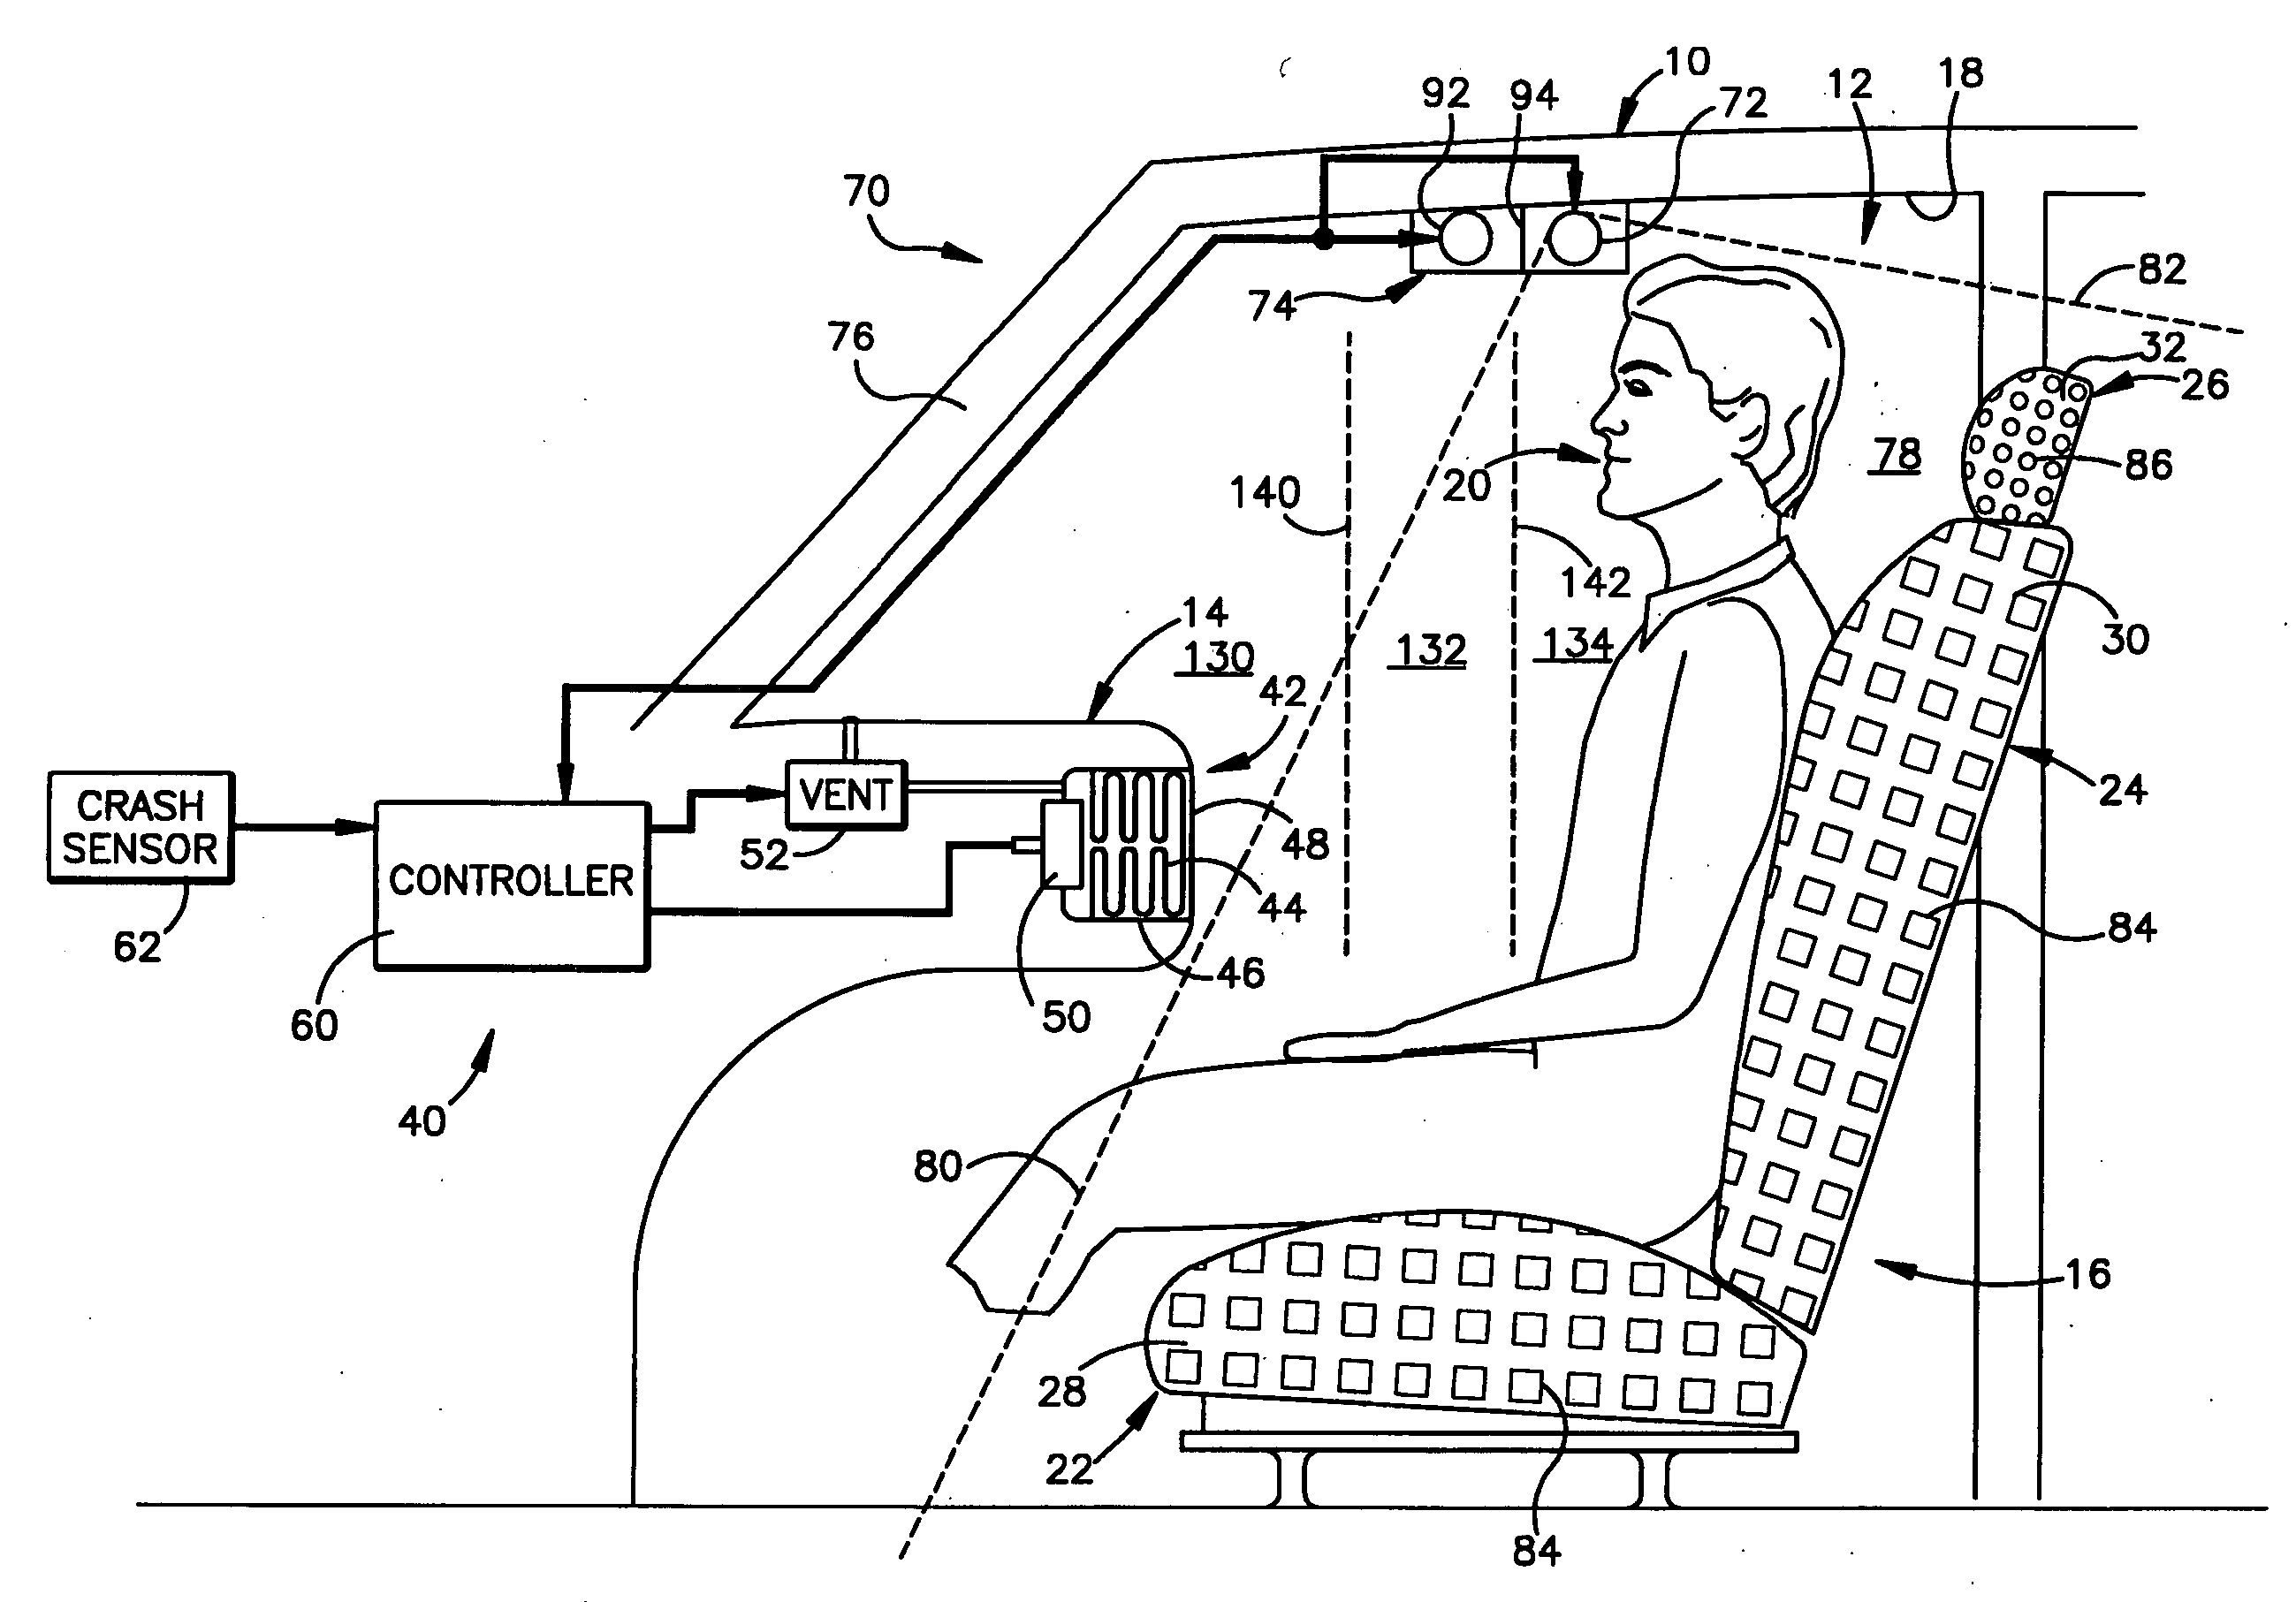 Apparatus and method for controlling an occupant protection system in response to determined passenger compartment occupancy information